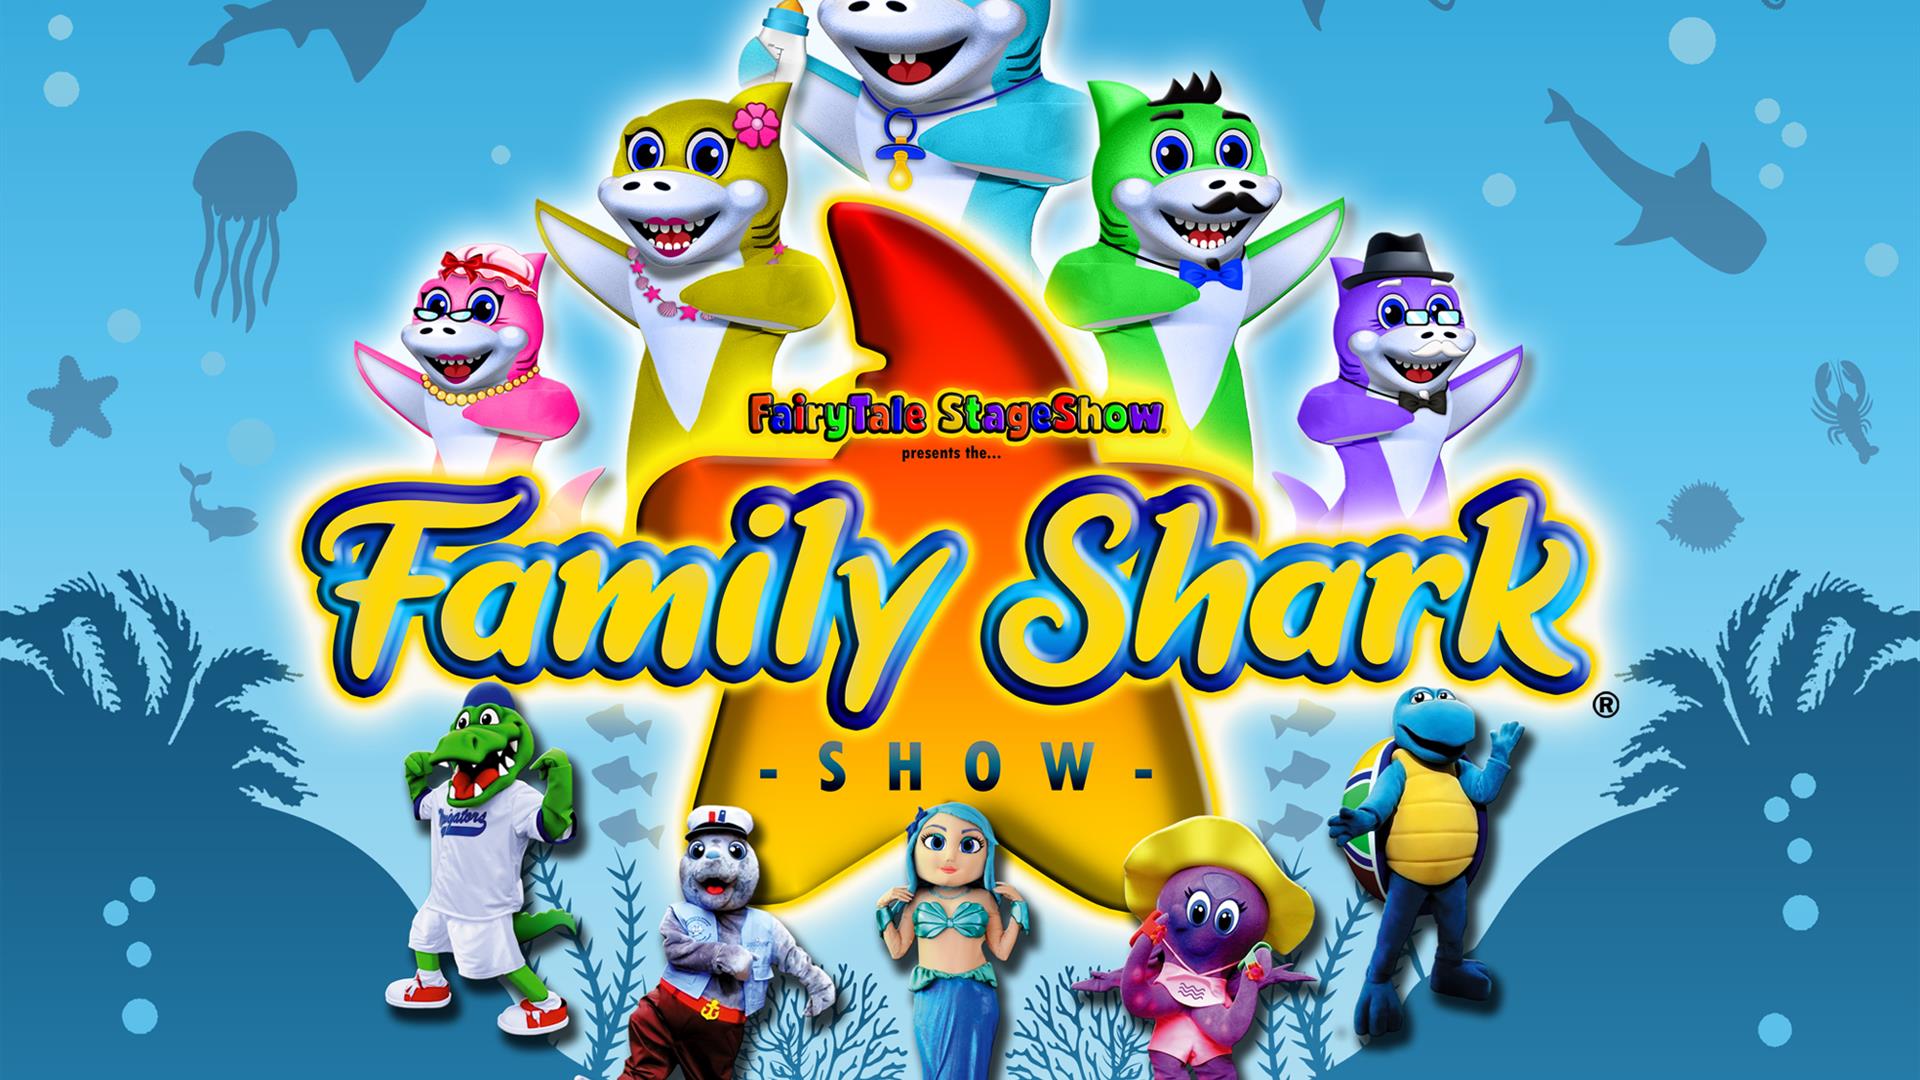 Image is the poster for The Family Shark Show